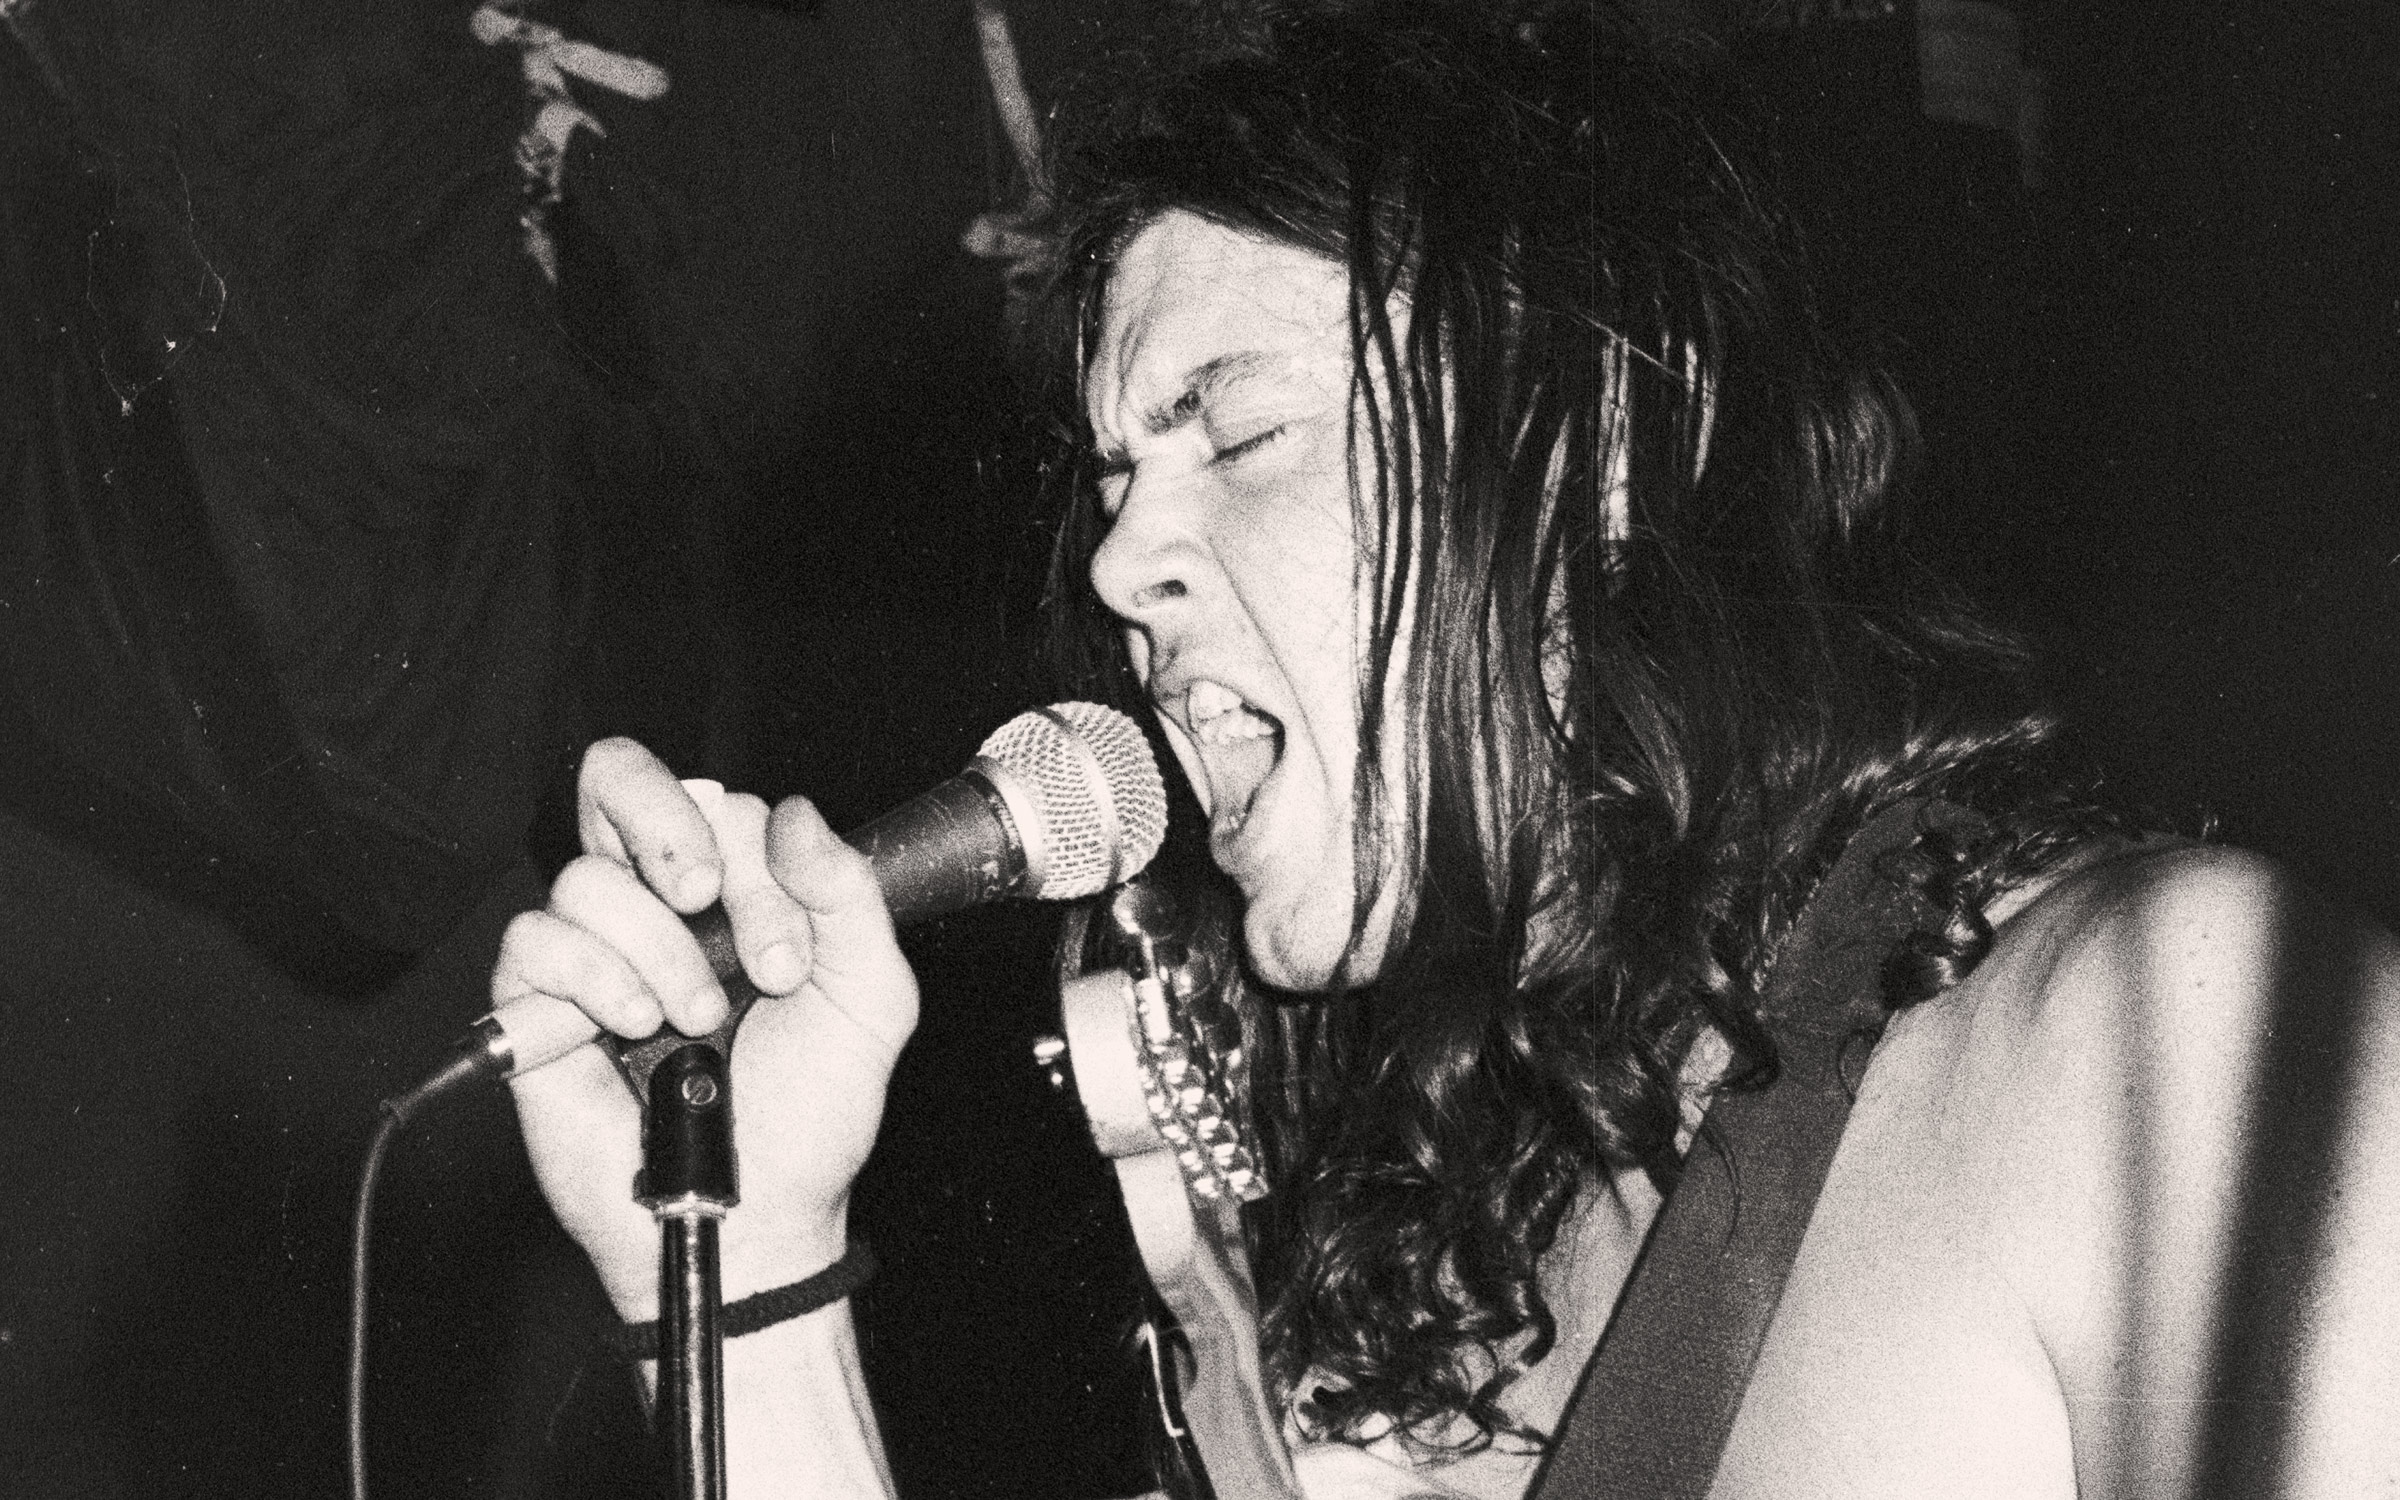 When Texas Punk Band Butthole Surfers Finally Scored a Hit, Their Fans Never Forgave Them